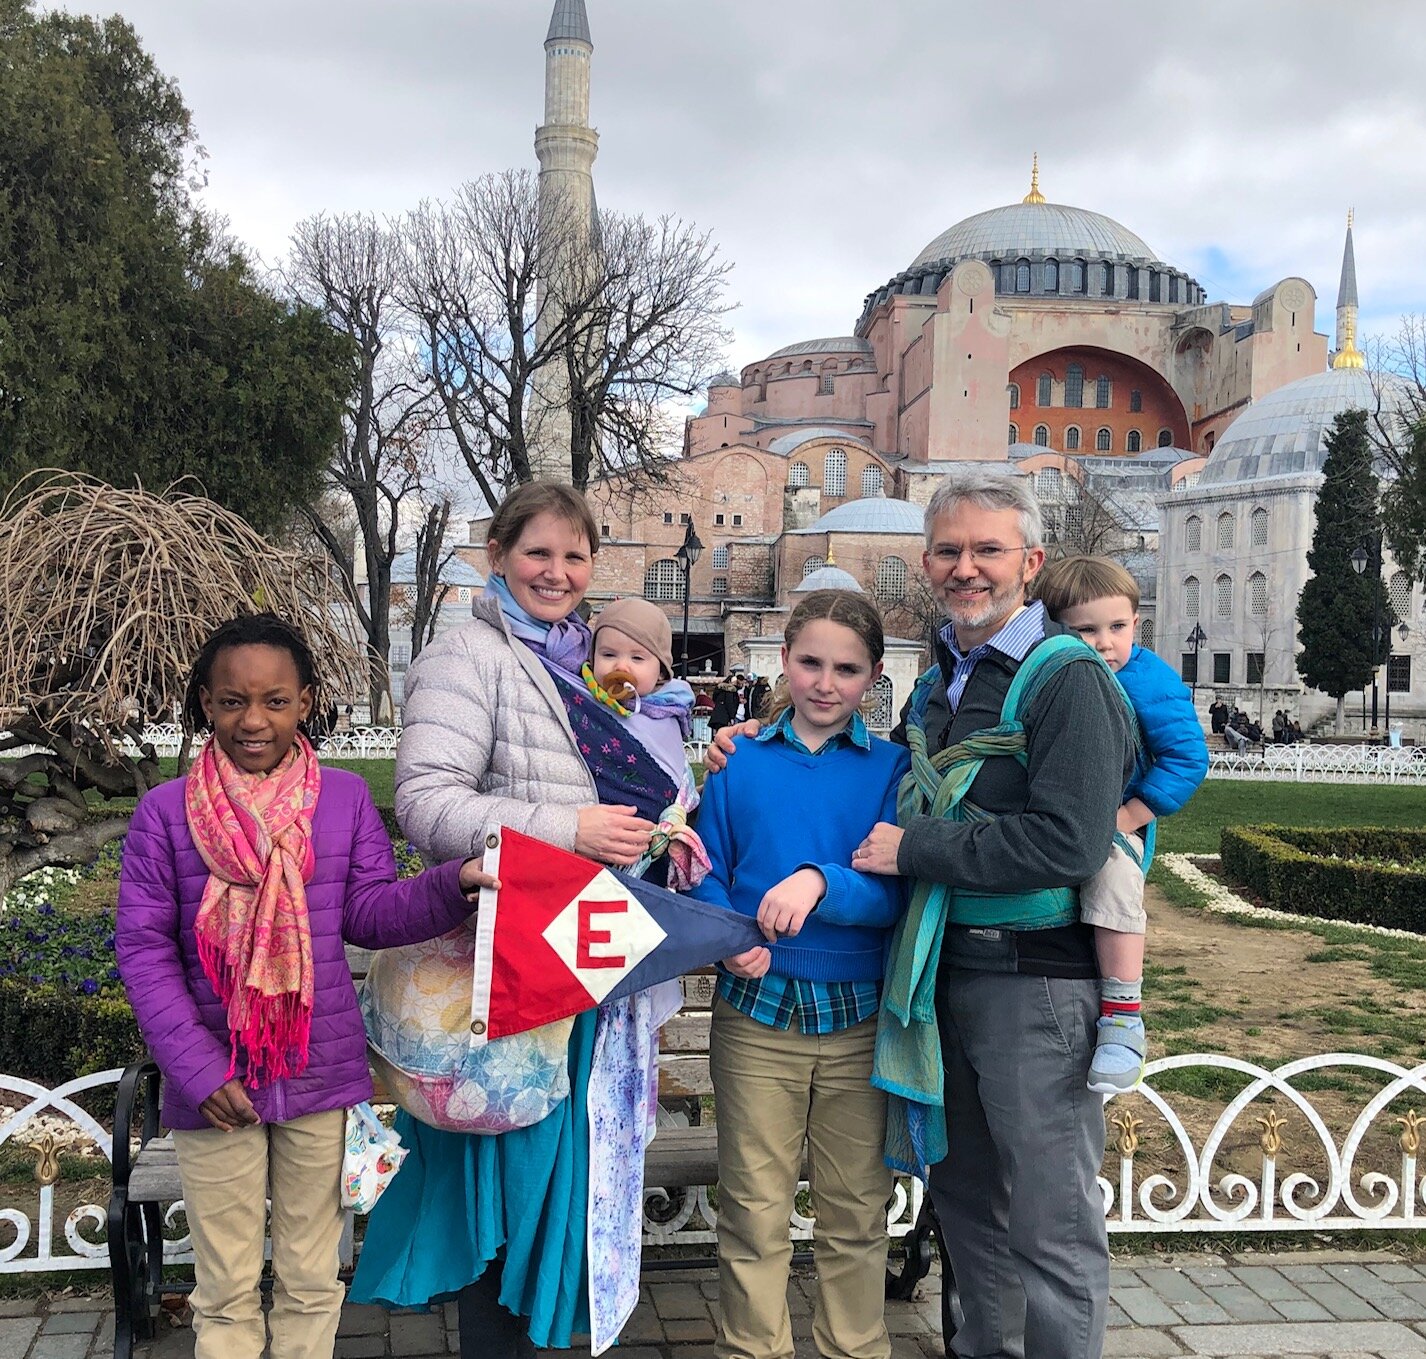  EYC pride from the Forrest Family in front of the Hagia Sopha in Instanbul, Turkey 